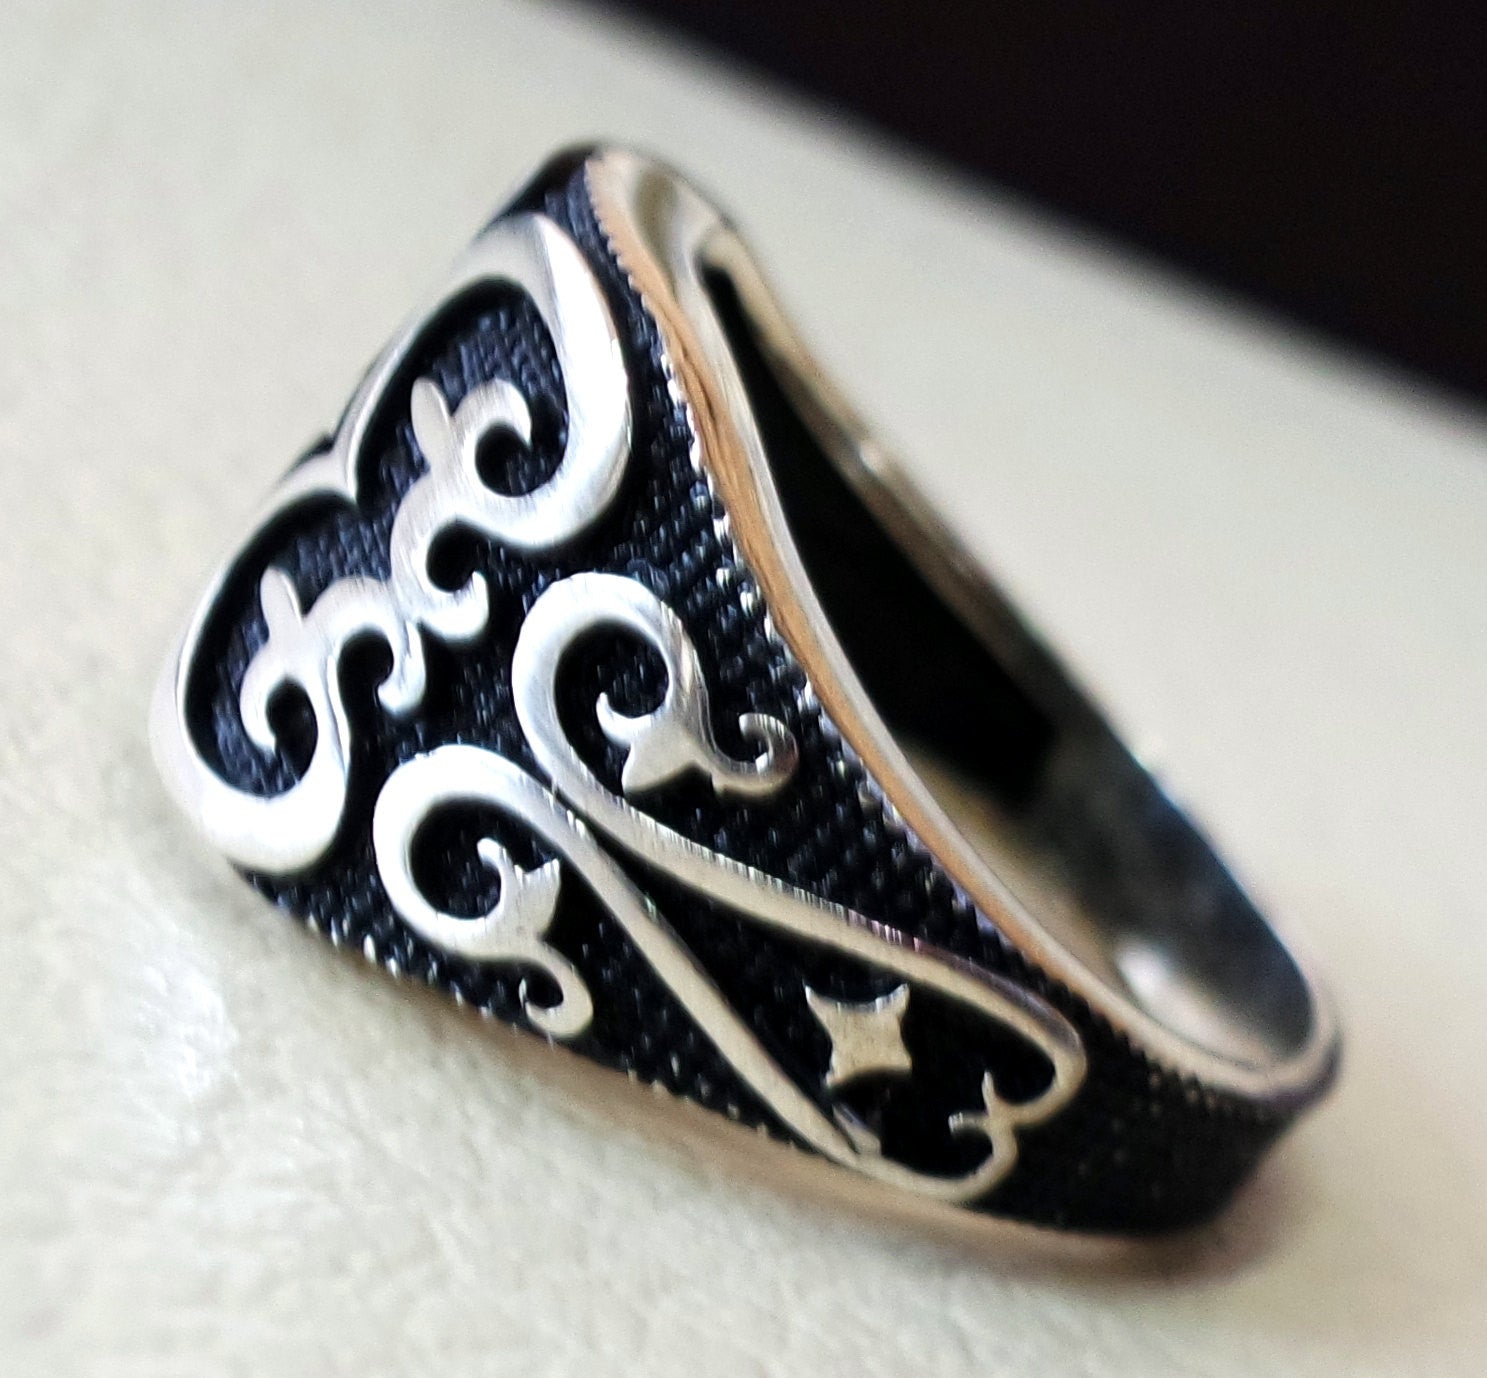 Fluer de lis celtic style heavy sterling silver 925 heavy man heavy symbol ring shape any size antique style high quality jewelry